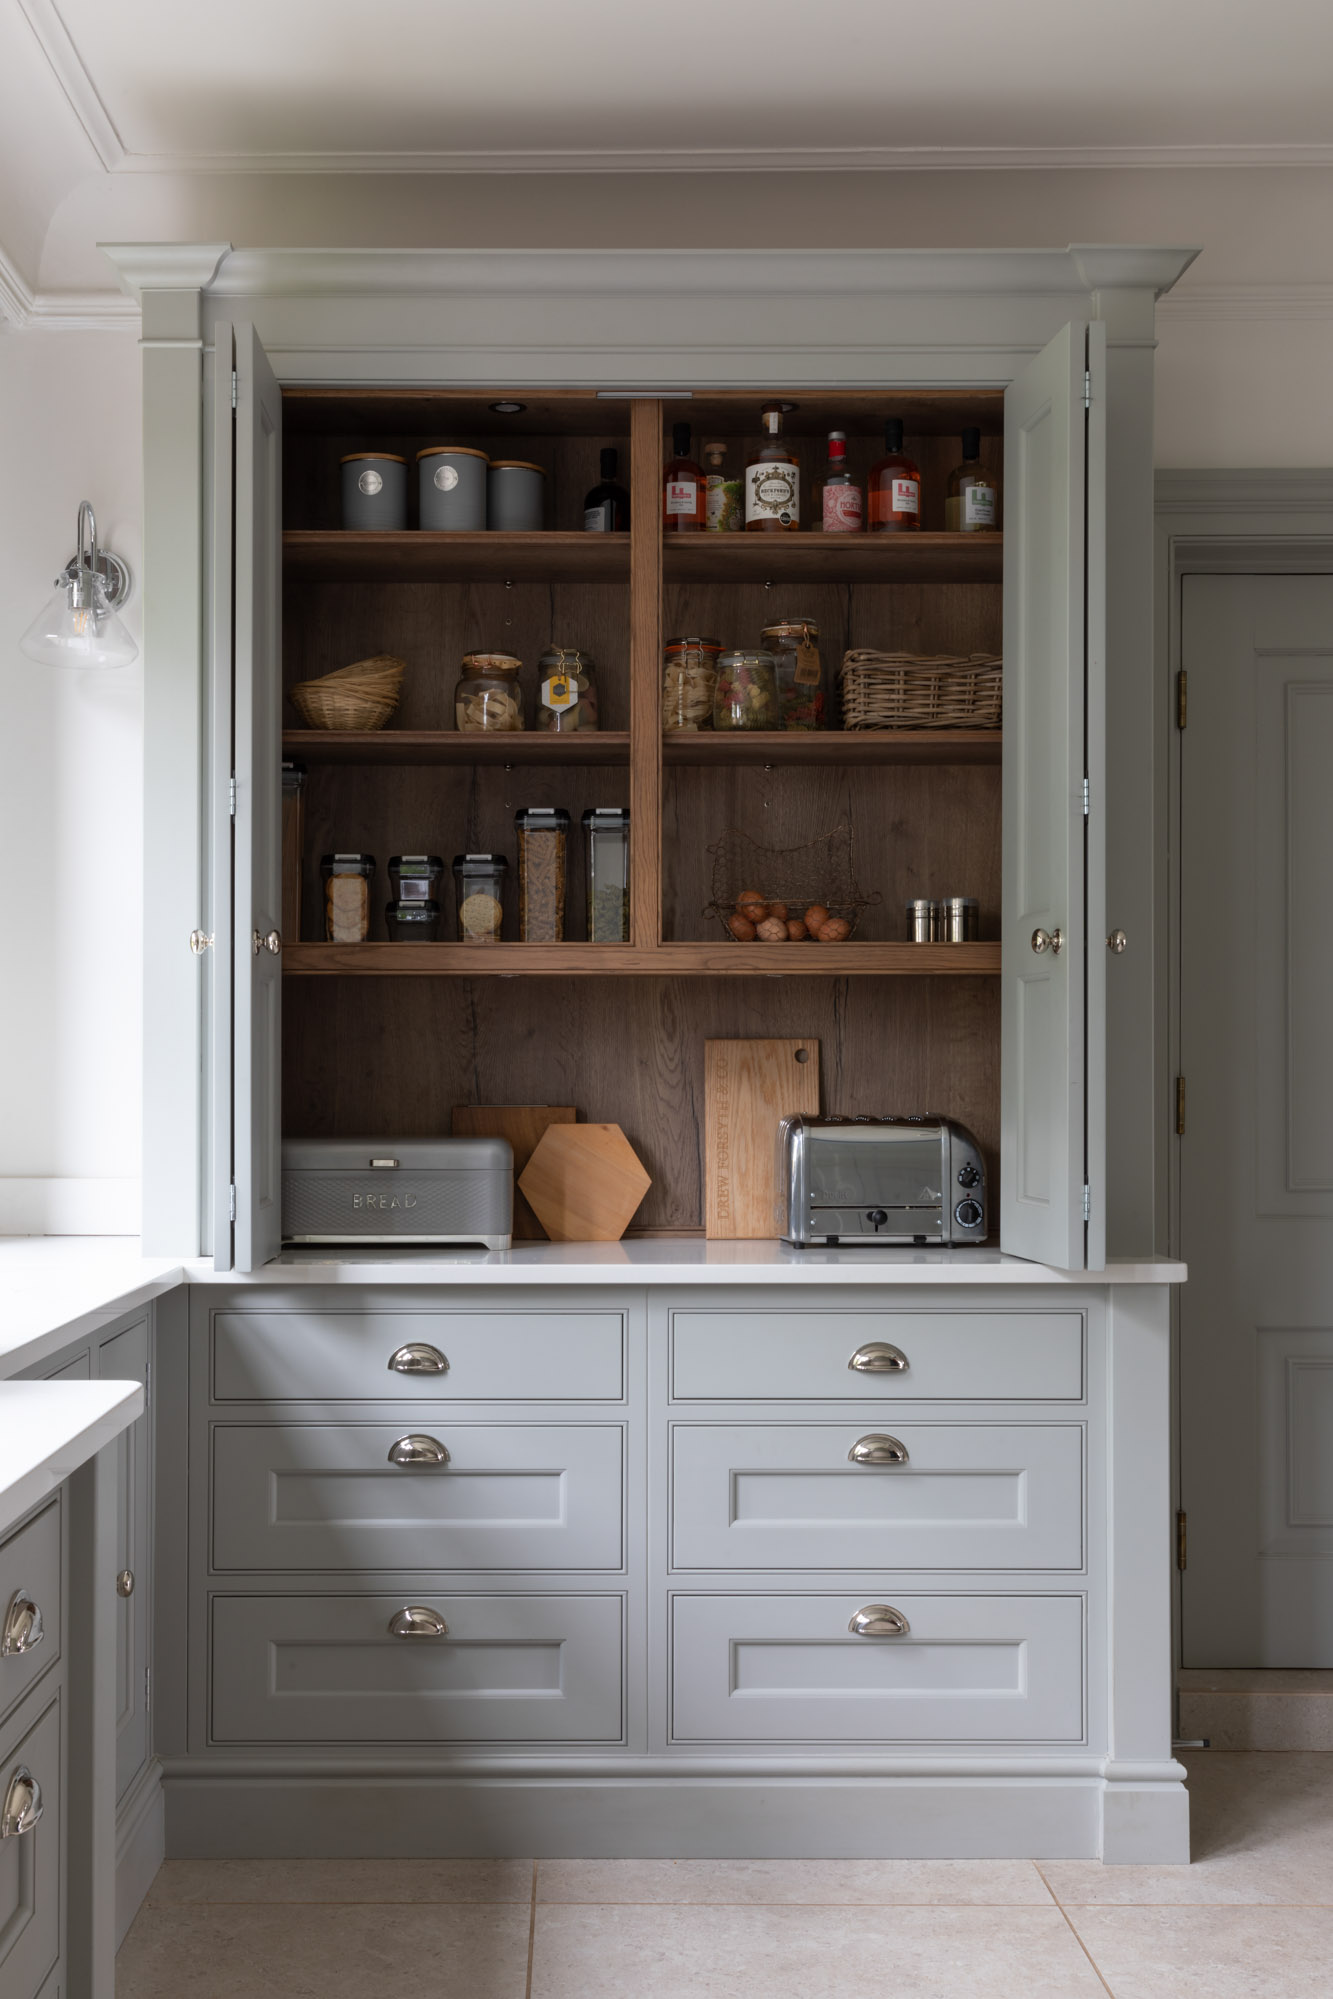 open fitted kitchen cabinetry larder breakfast bar with drawers and bi-fold doors in white paint